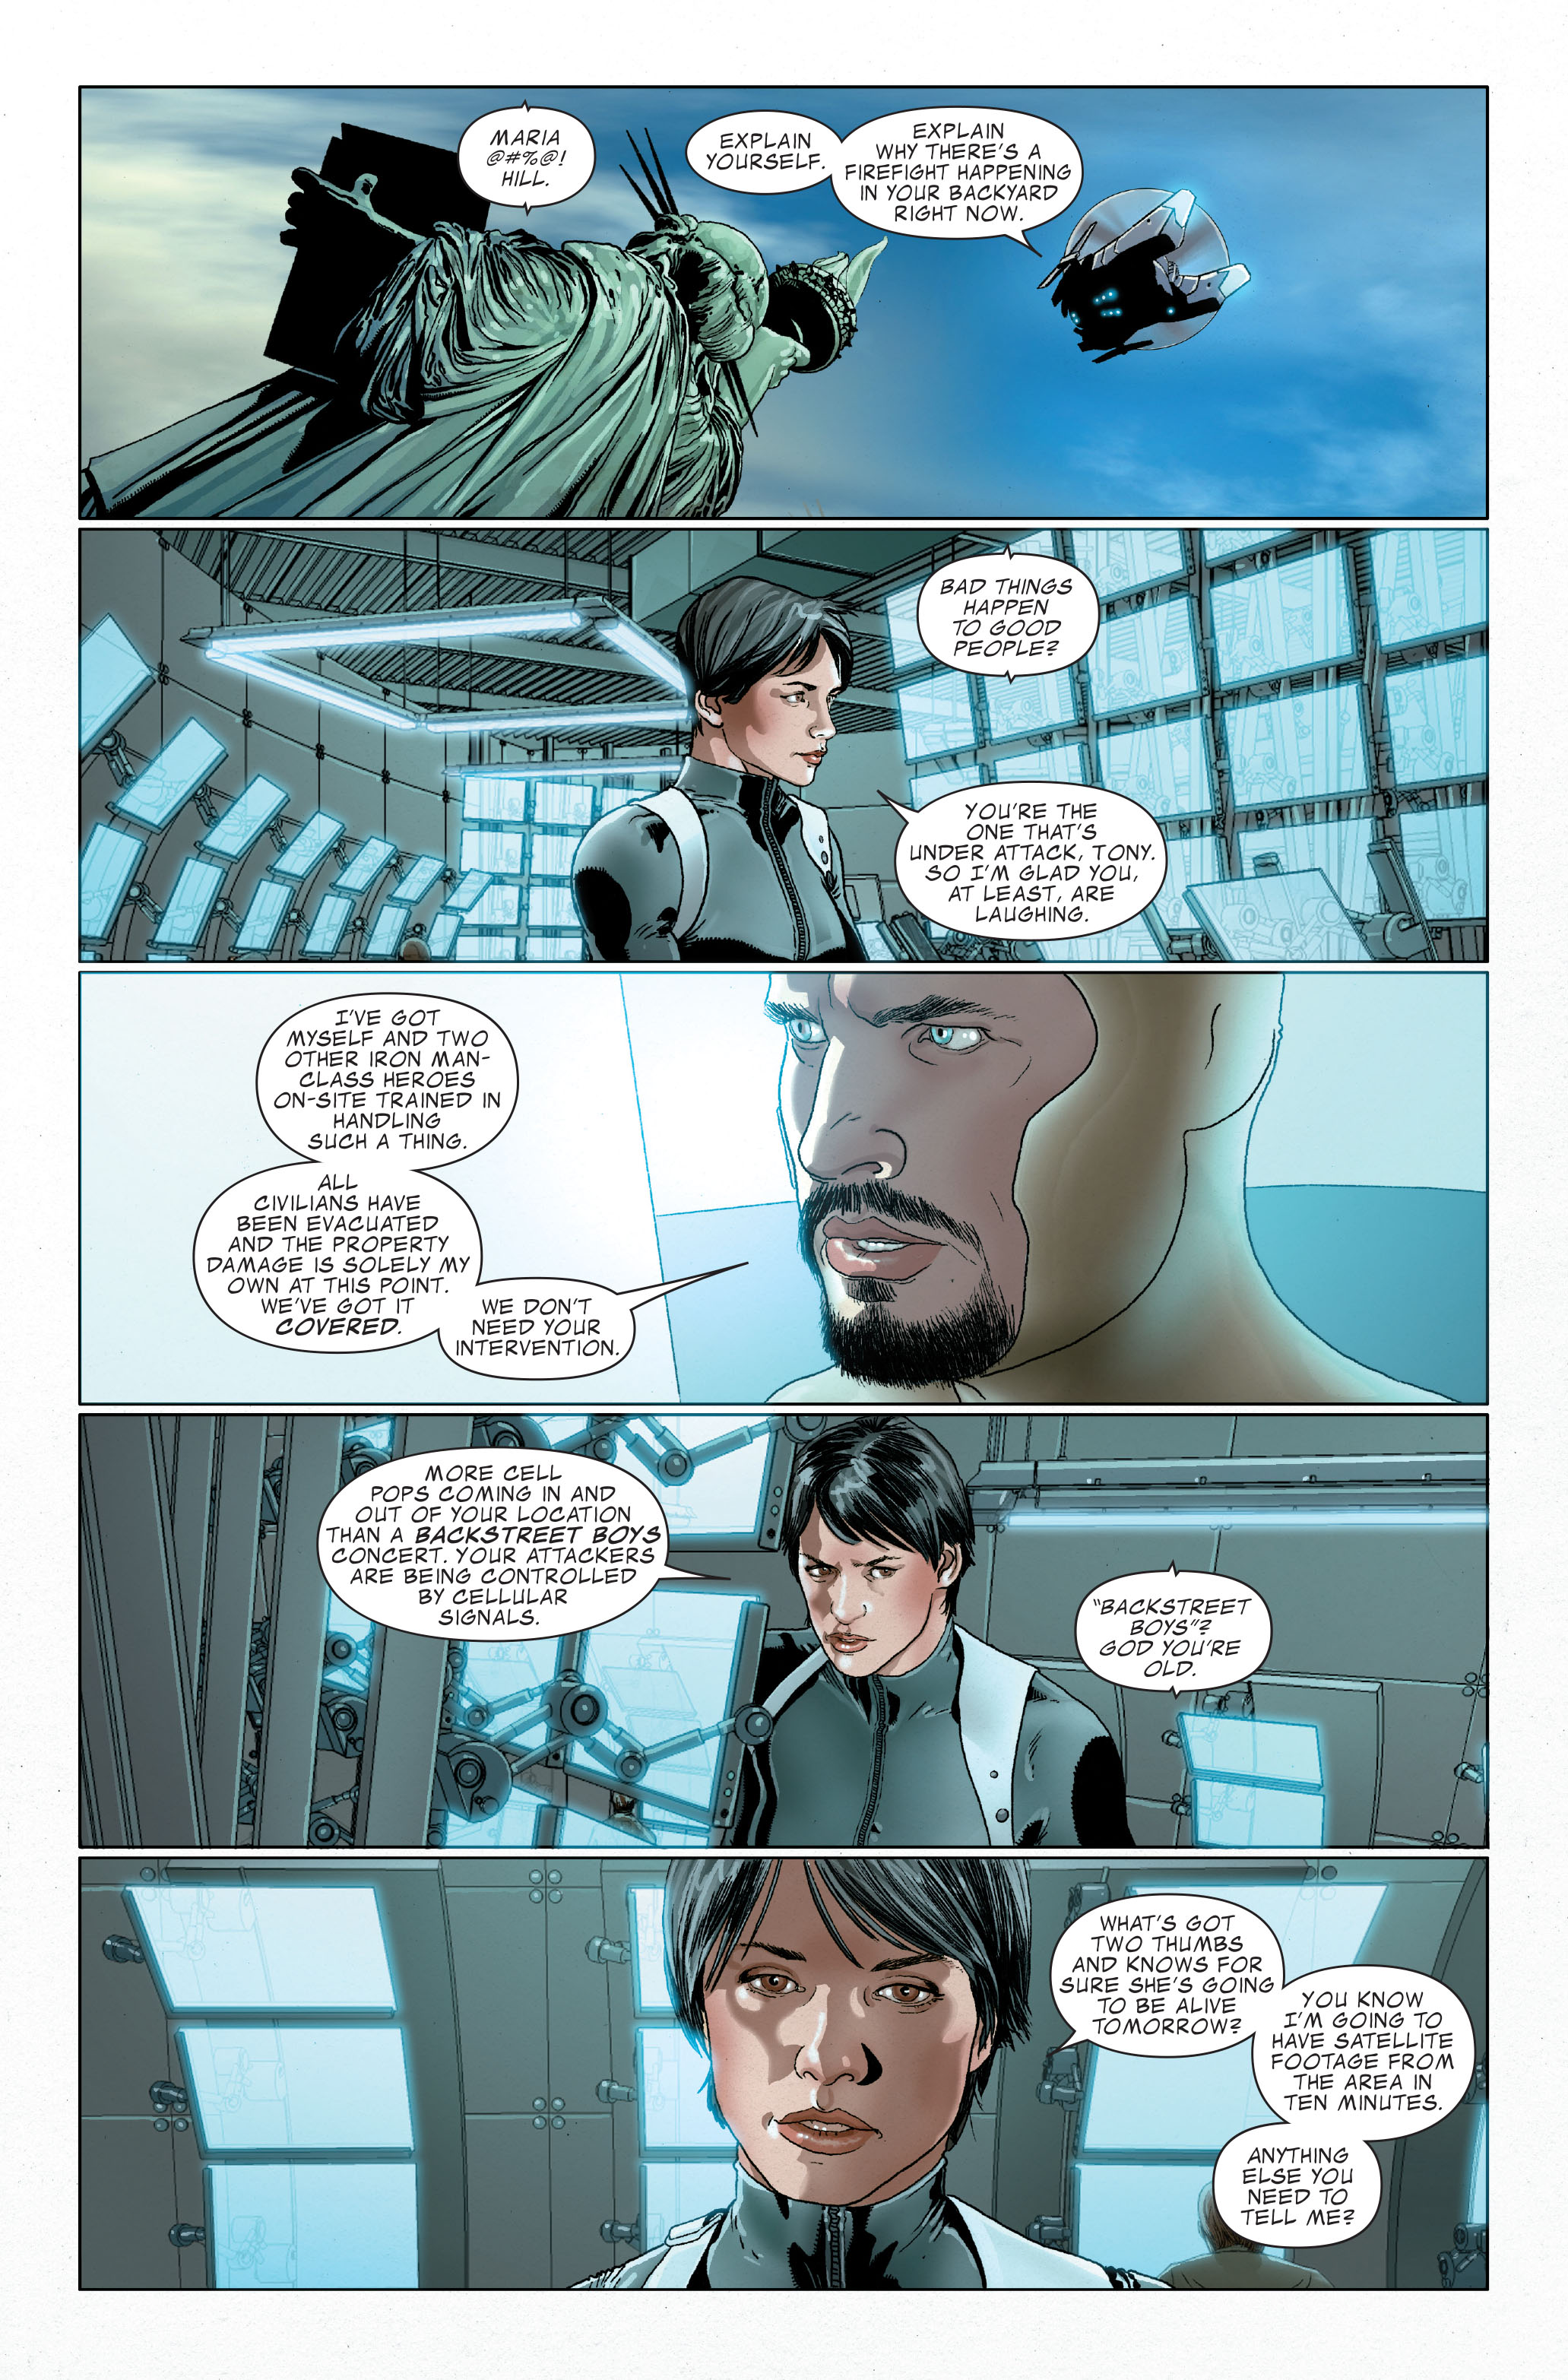 Invincible Iron Man (2008) 32 Page 11